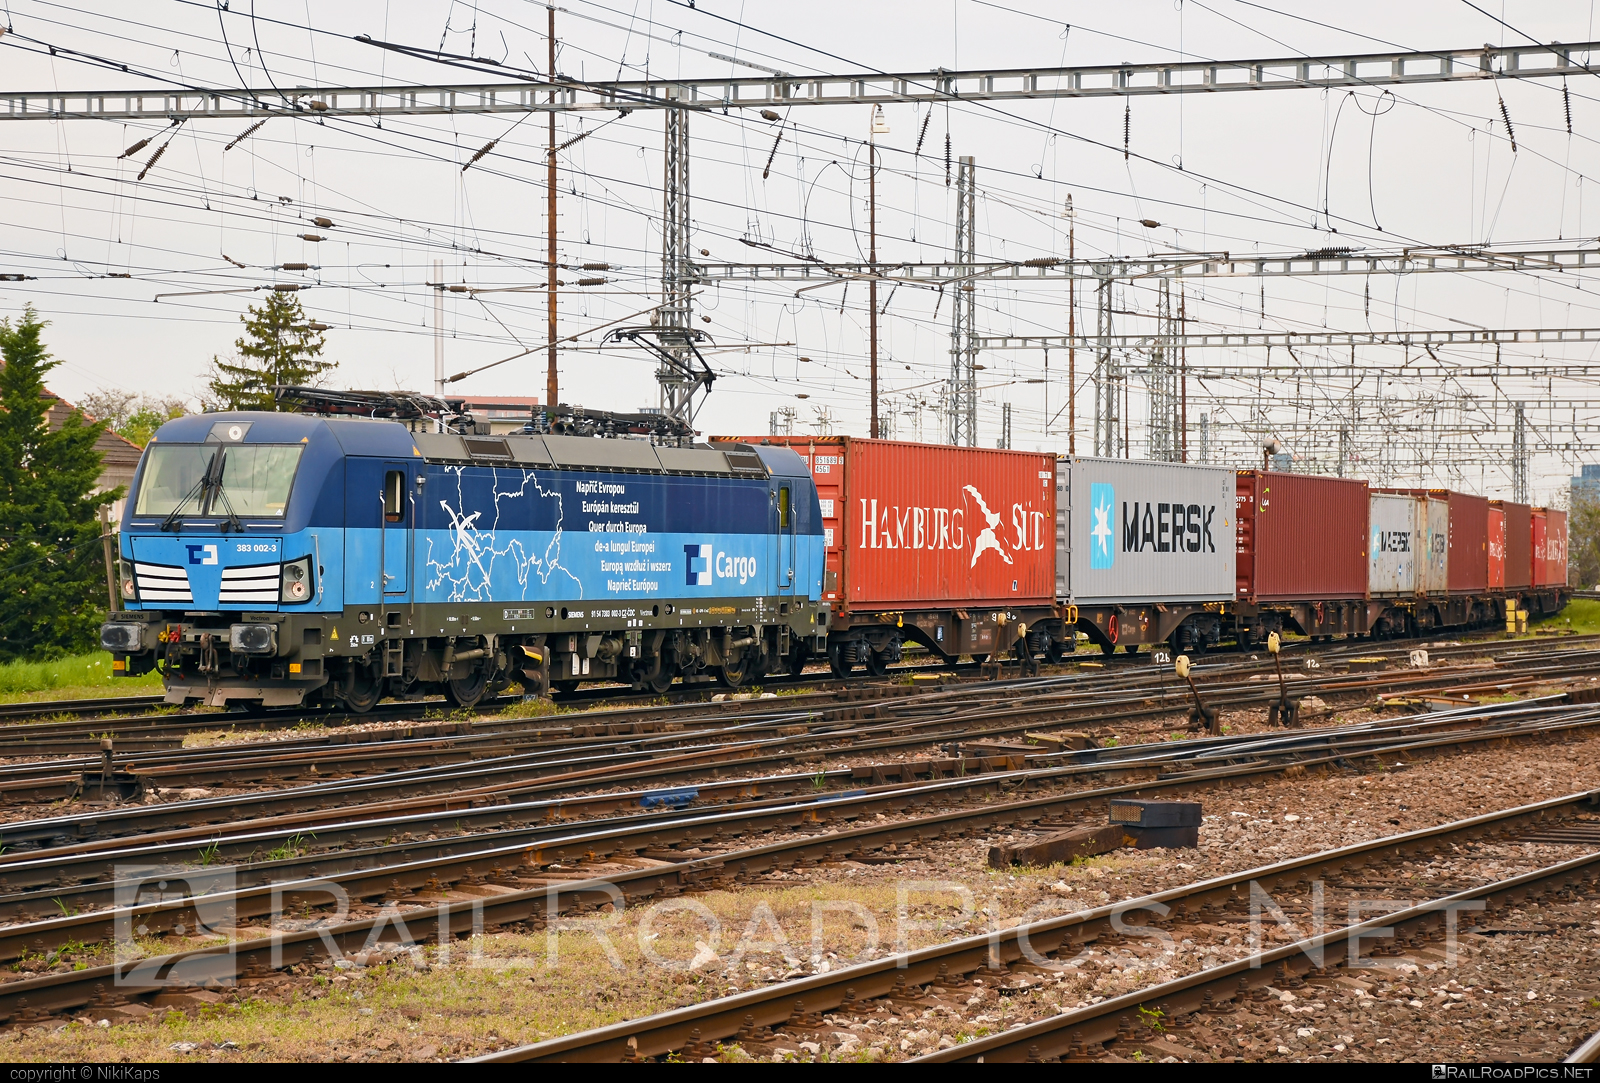 Siemens Vectron MS - 383 002-3 operated by ČD Cargo, a.s. #cdcargo #container #flatwagon #maersk #siemens #siemensVectron #siemensVectronMS #vectron #vectronMS